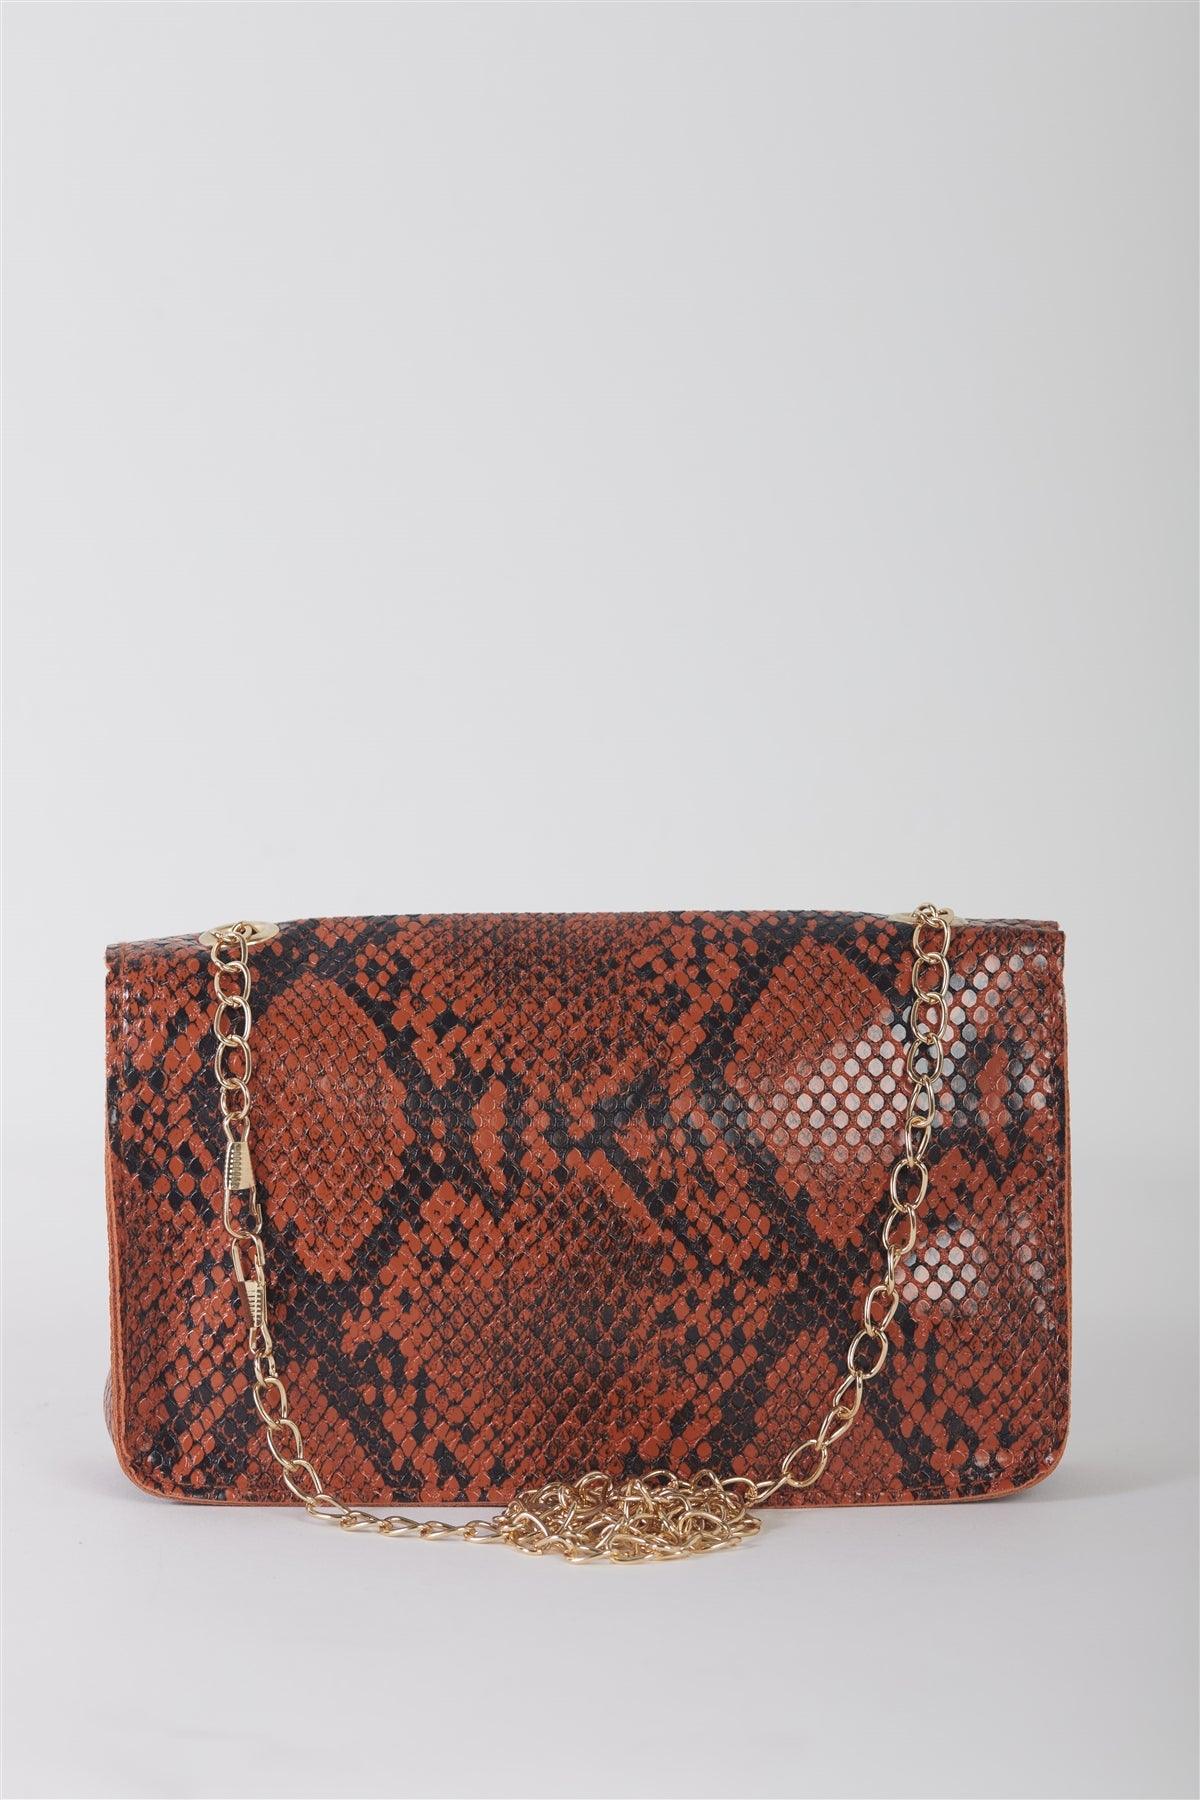 Rust Faux Snake Leather Metal Rings Gold Chain Crossbody Bag /3 Bags